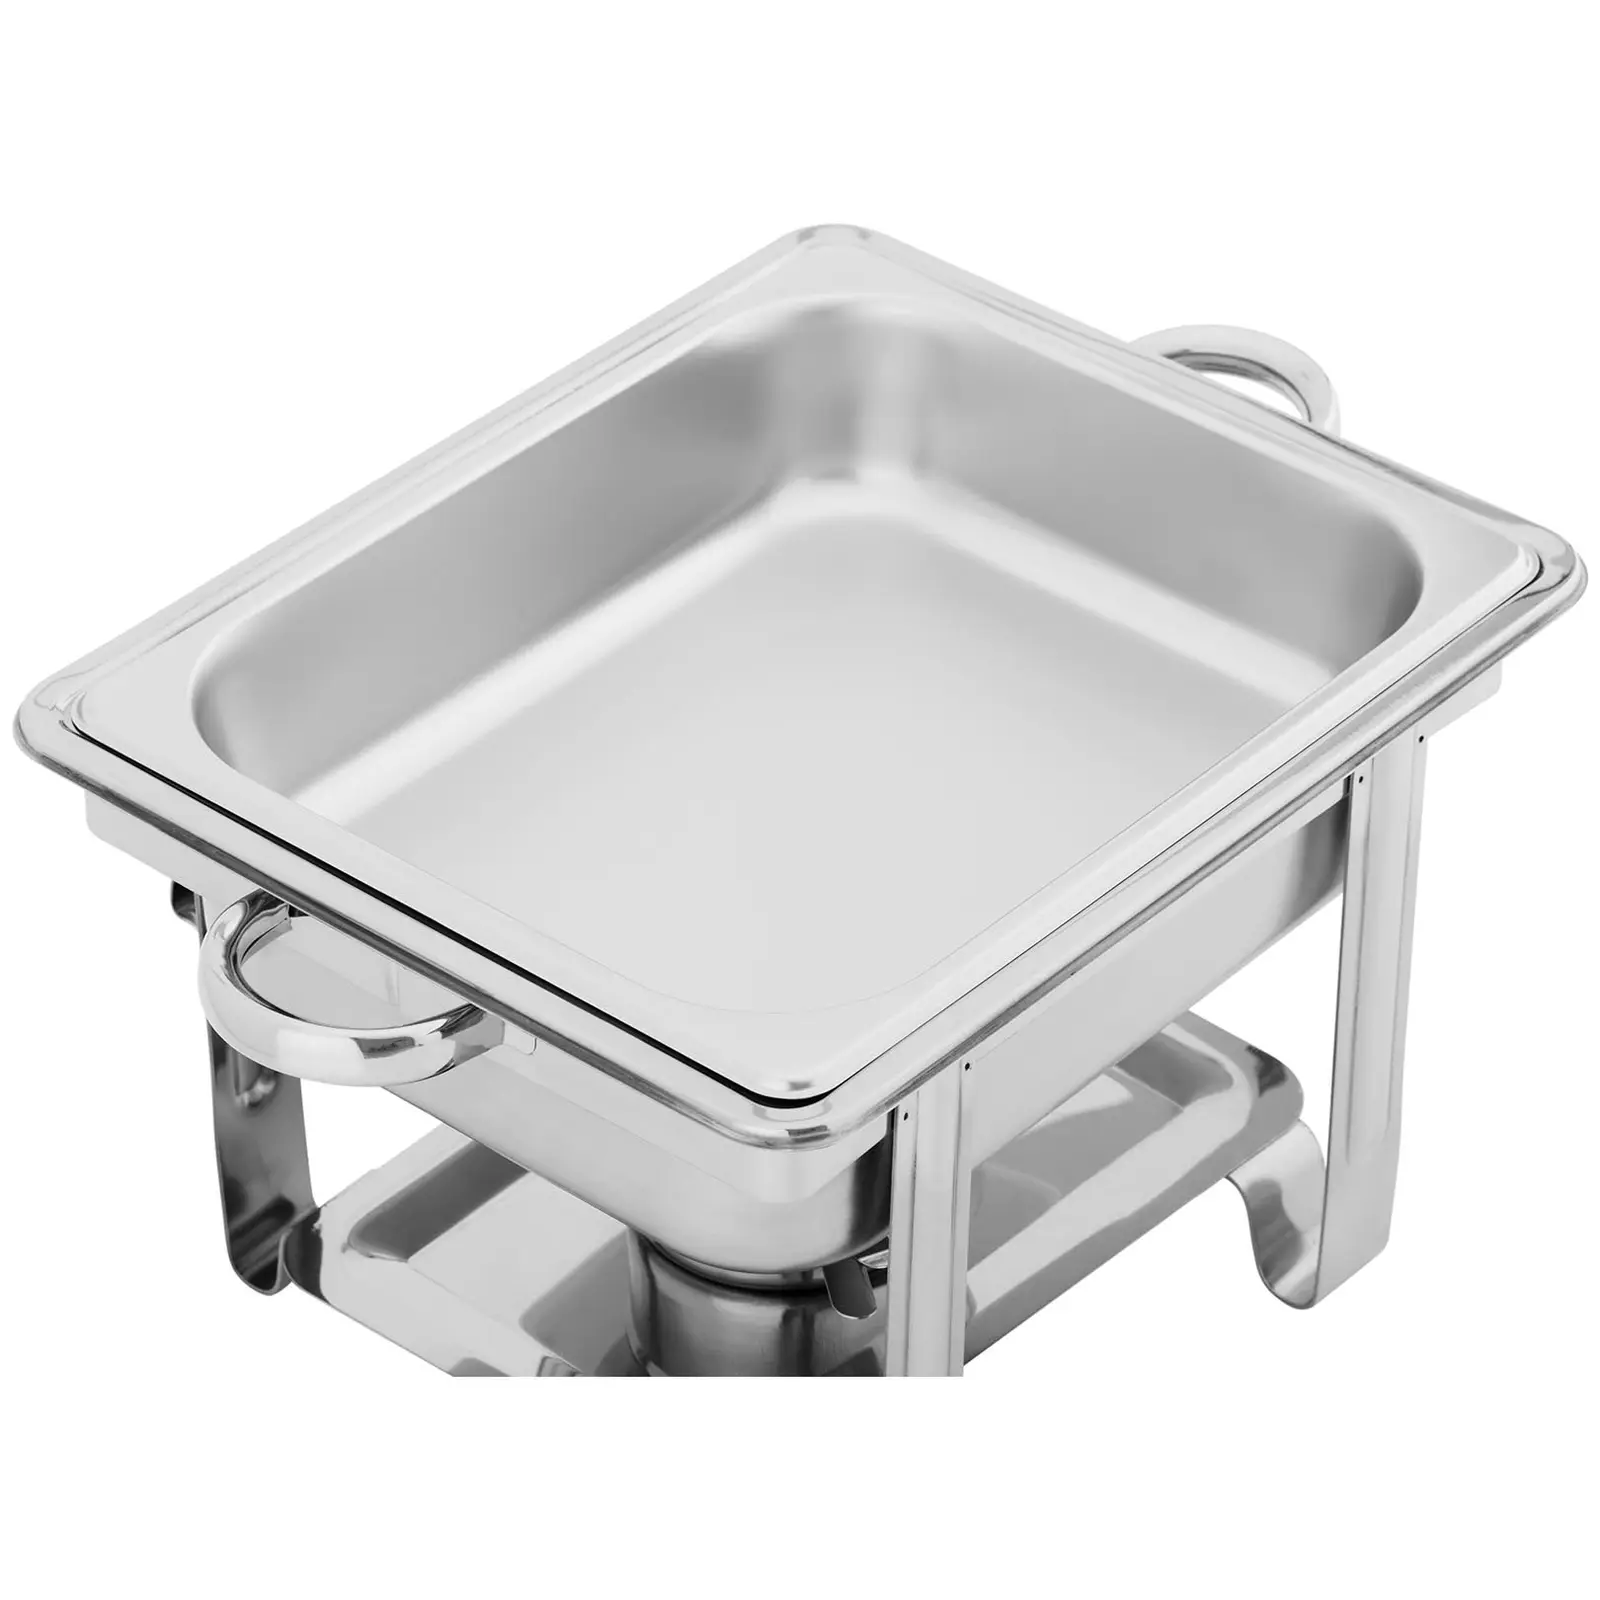 Chafing dish - 4,5 L - inkl. GN 1/2 behållare - Royal Catering